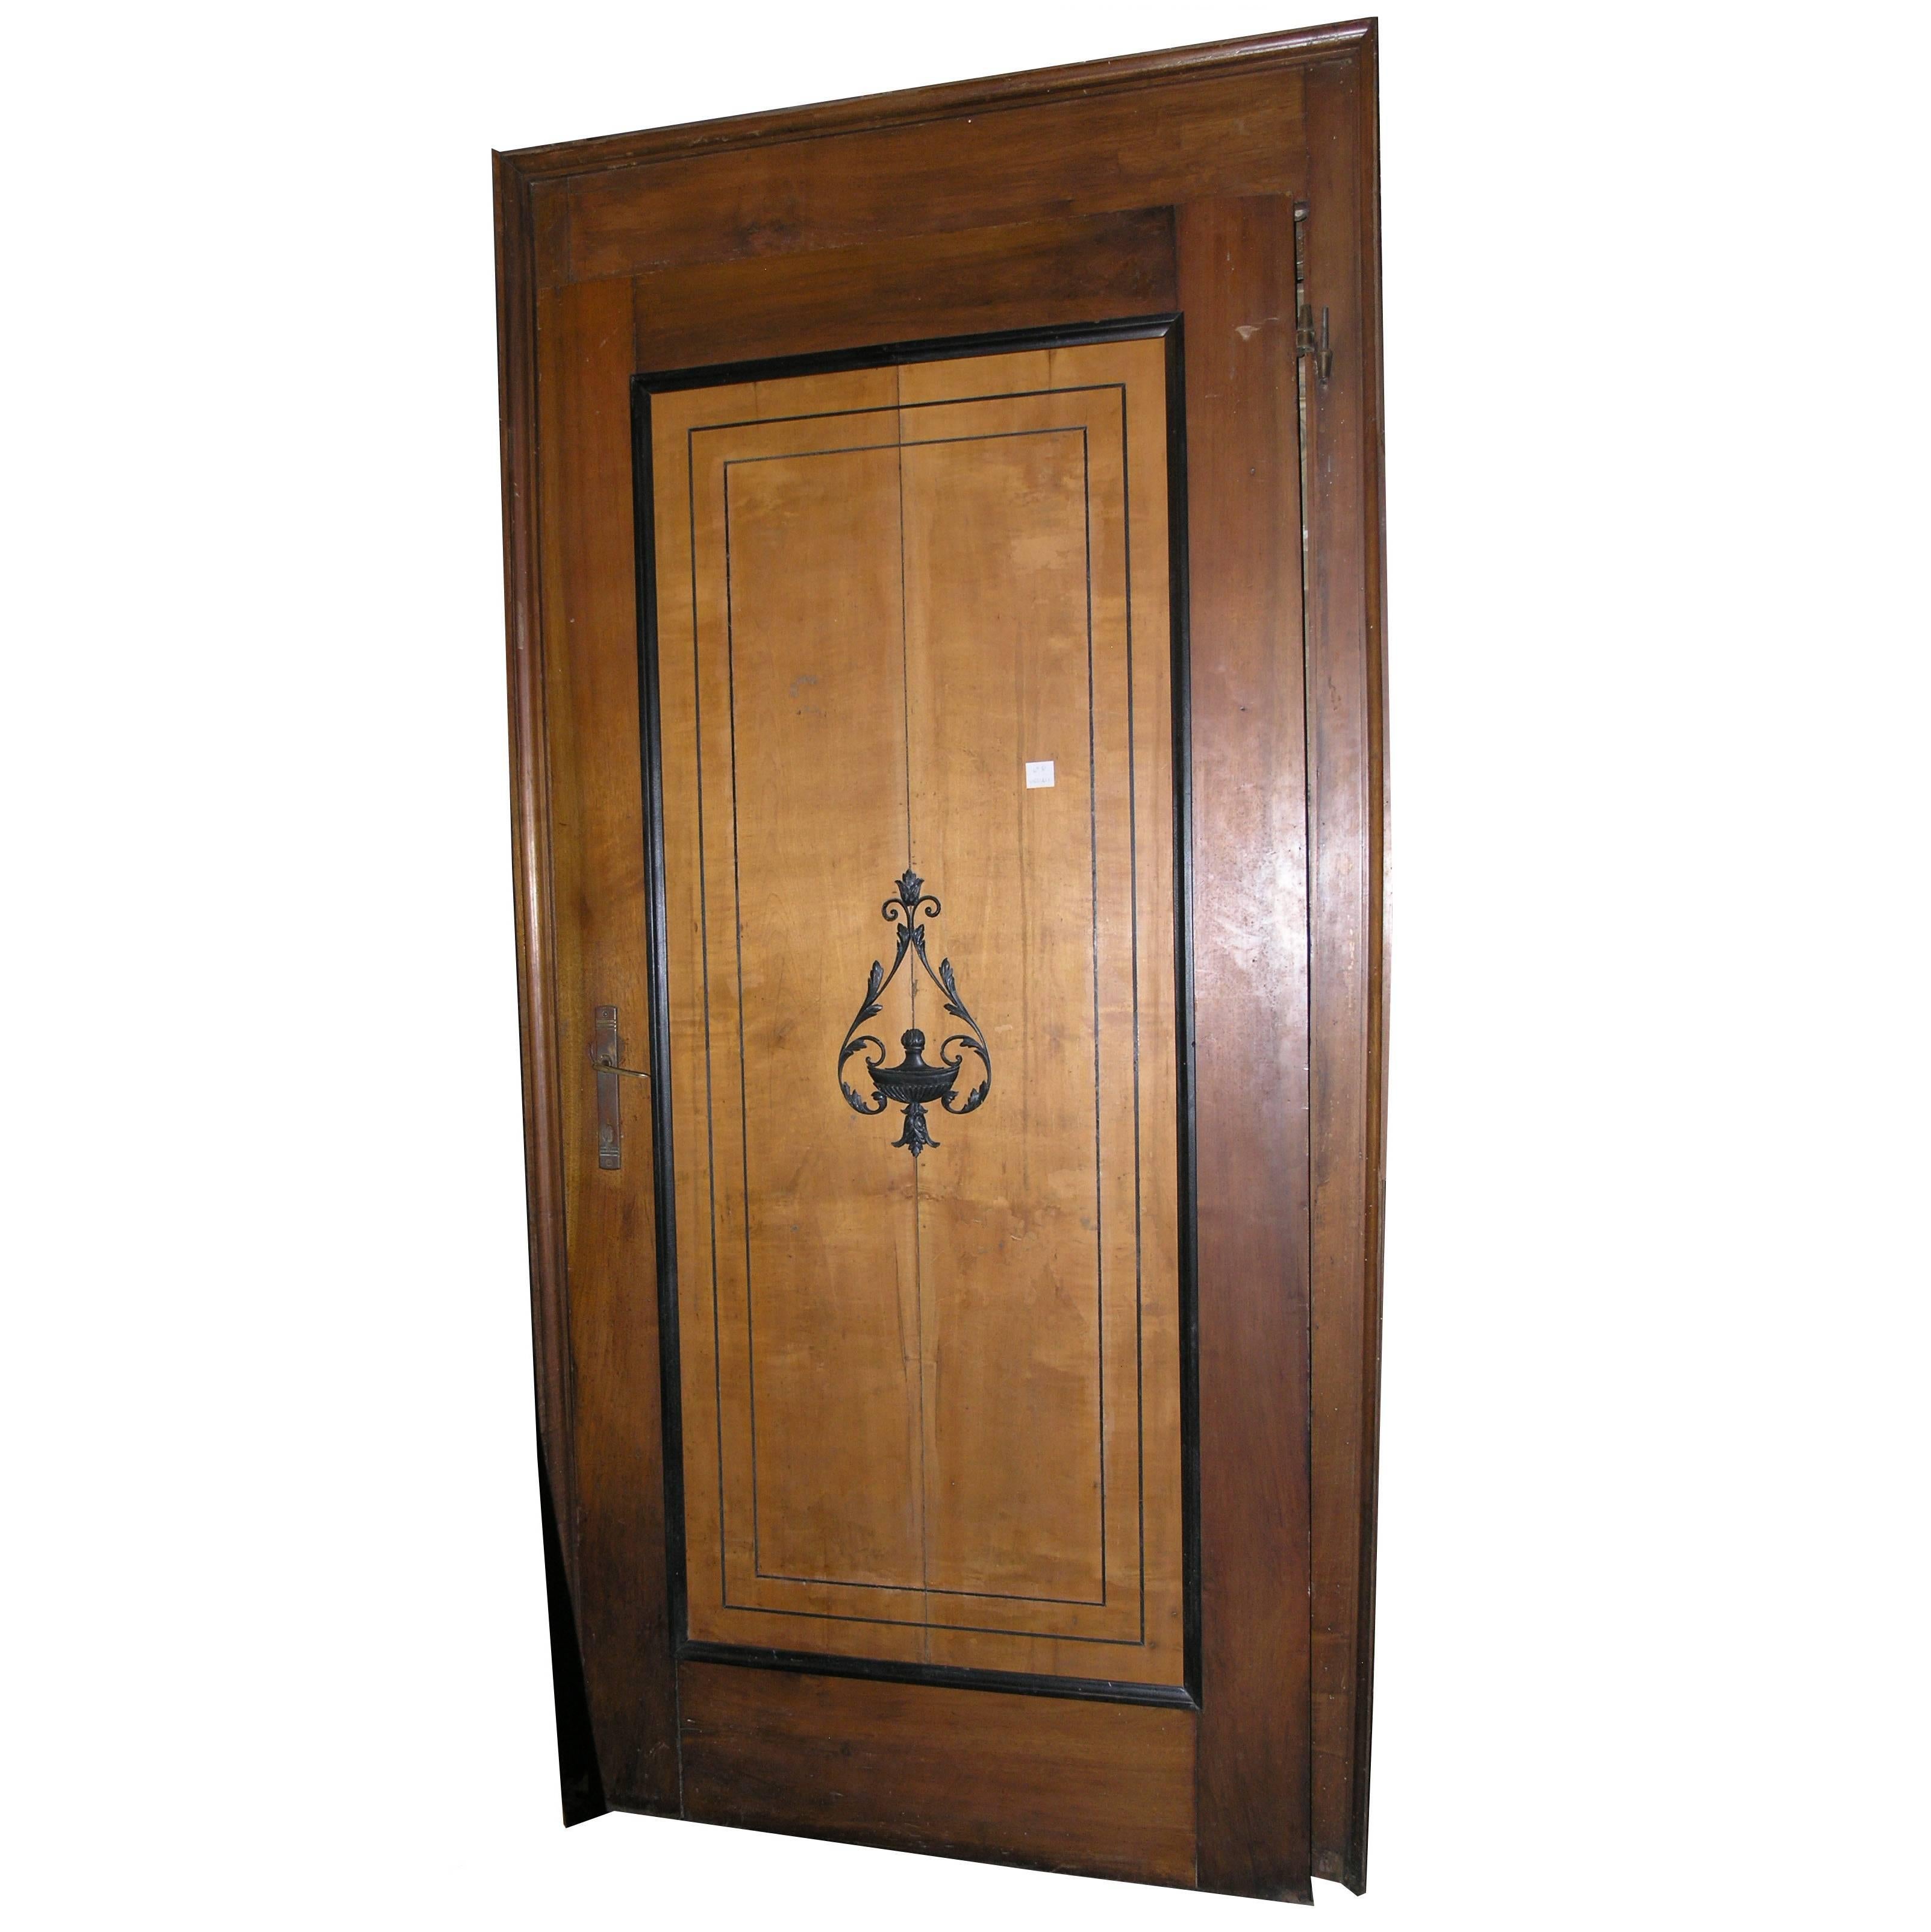 N.8 of the same old wooden doors in different colors with frame, '900 Italy For Sale